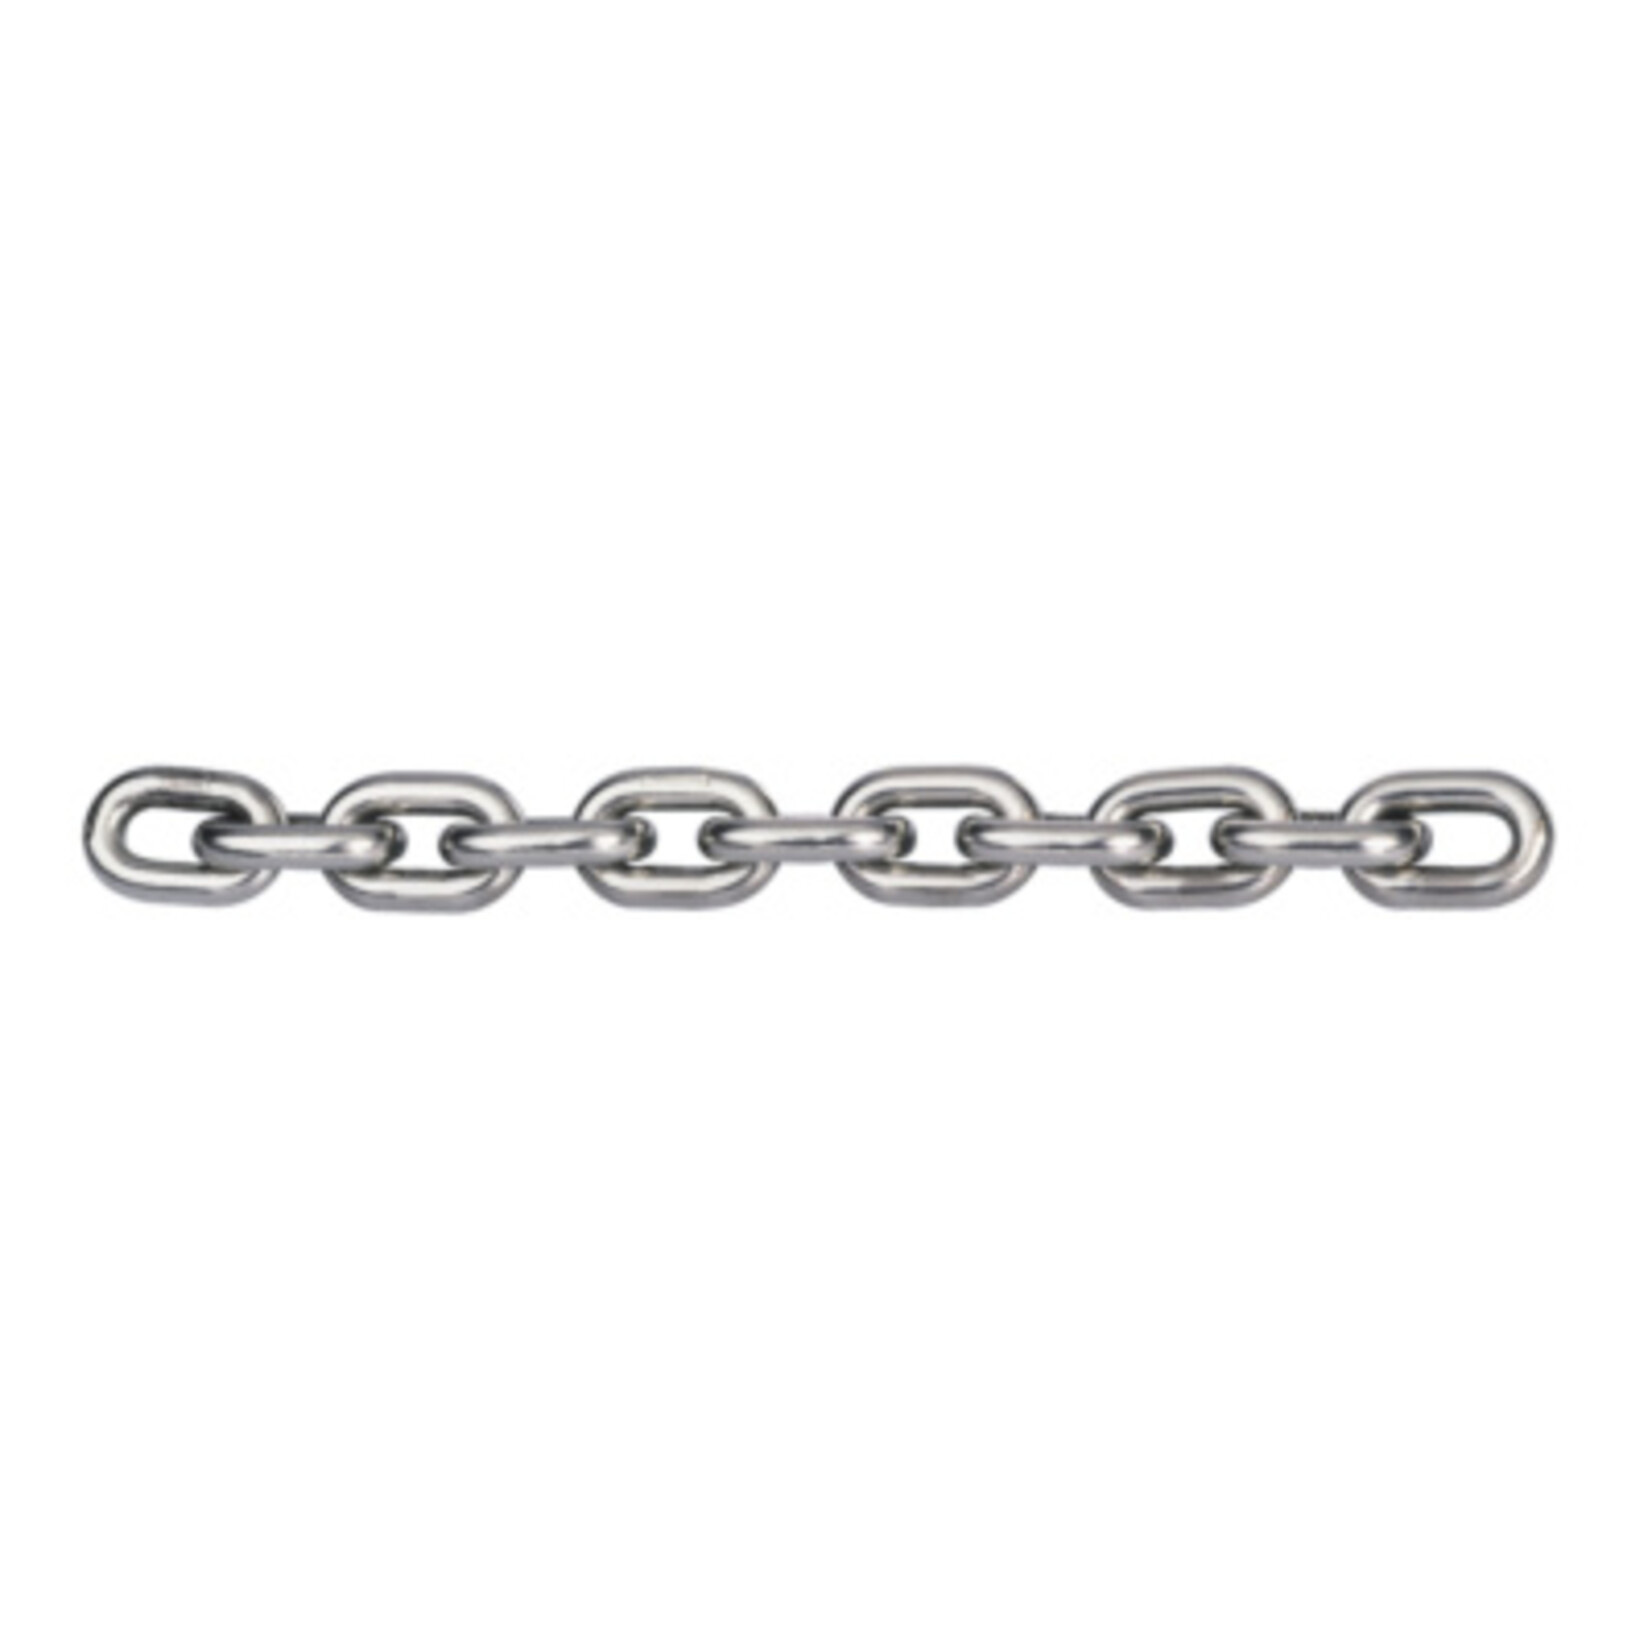 Plastimo Chain stainless steel in drum dia 6mm 50